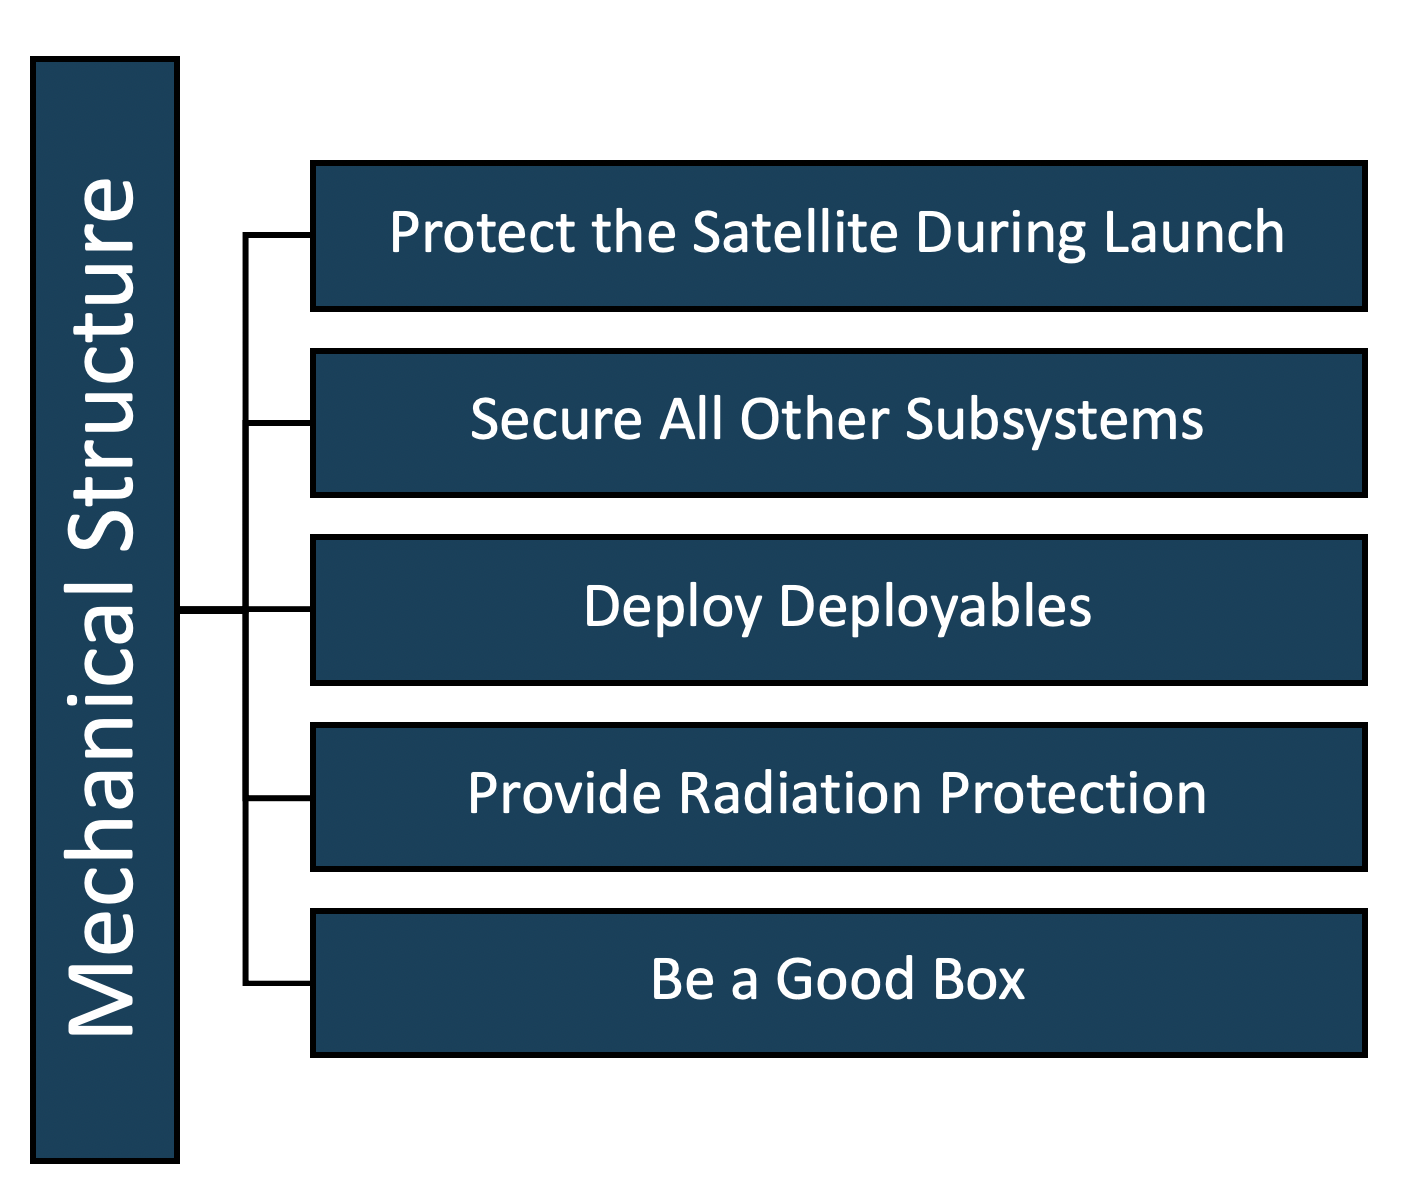 Mechanical Structure
                    Protect the Satellite During Launch
                    Secure All Other Subsystems
                    Deploy Deployables
                    Provide Radiation Protection
                    Be a Good Box
                